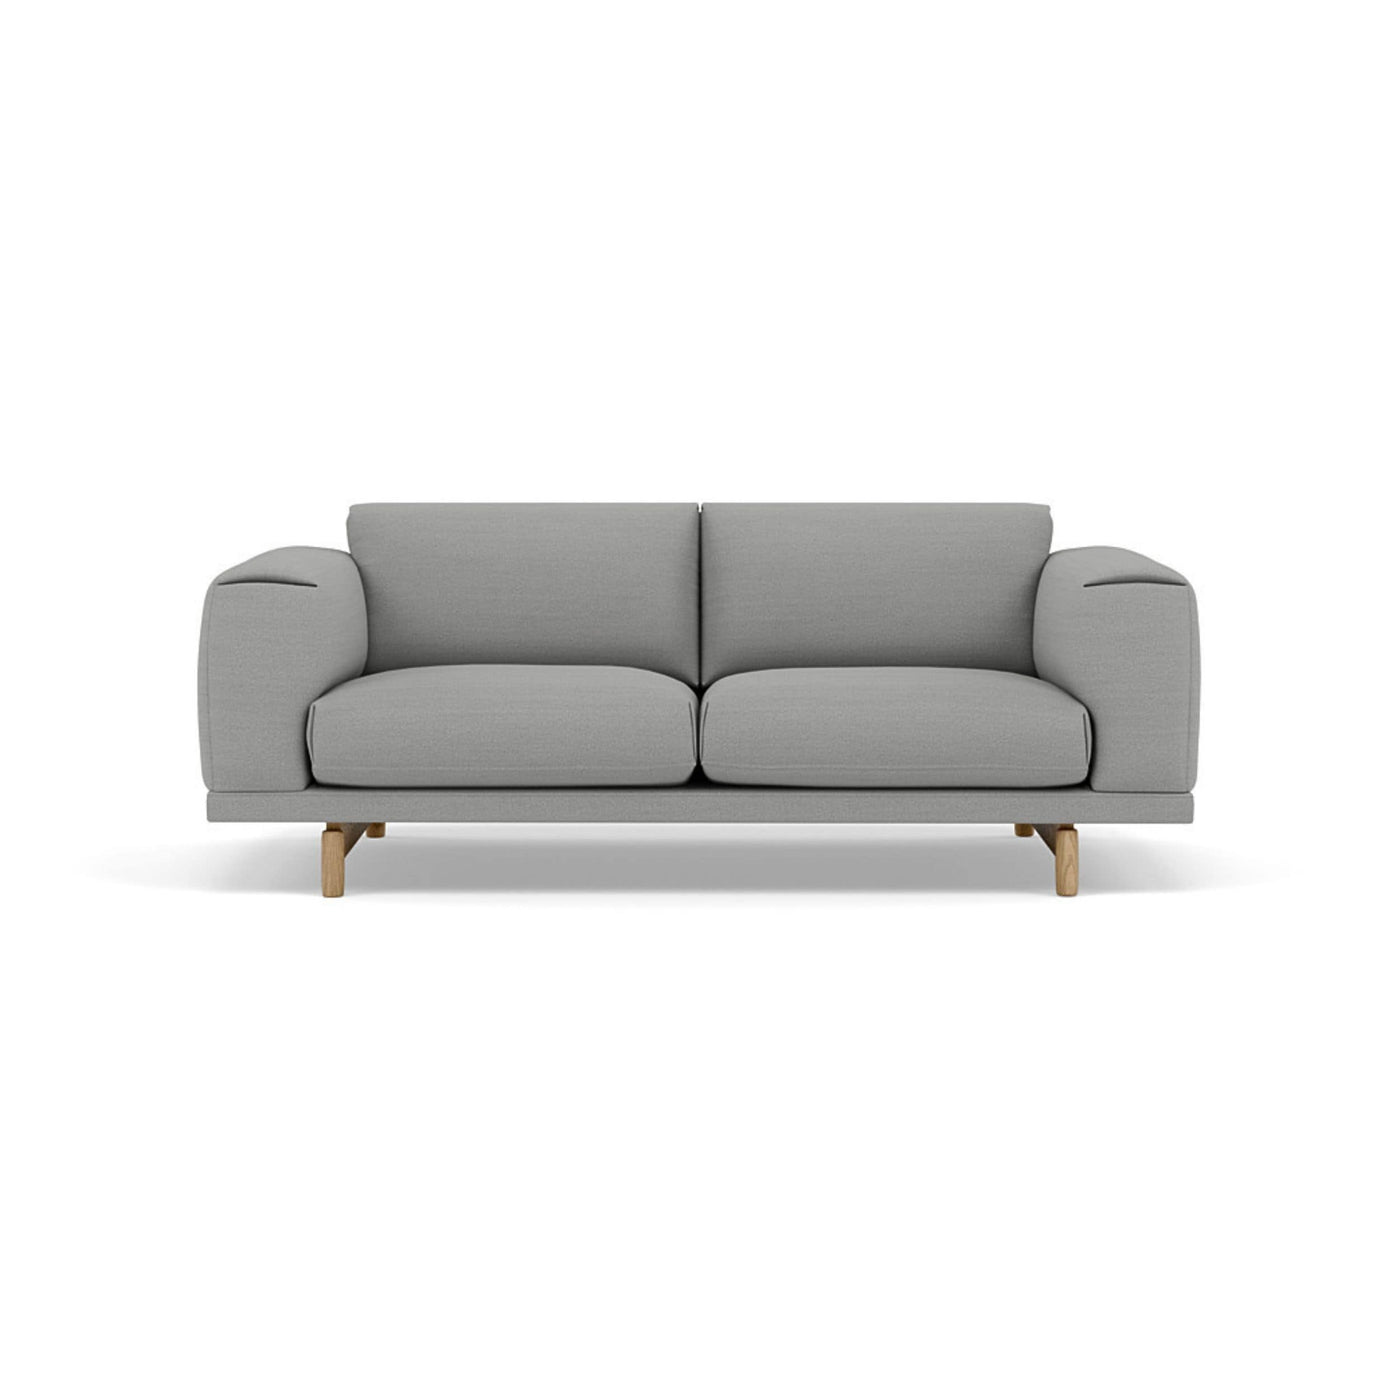 Muuto Rest Sofa 2 seater, available made to order from someday designs. #colour_hallingdal-123-grey